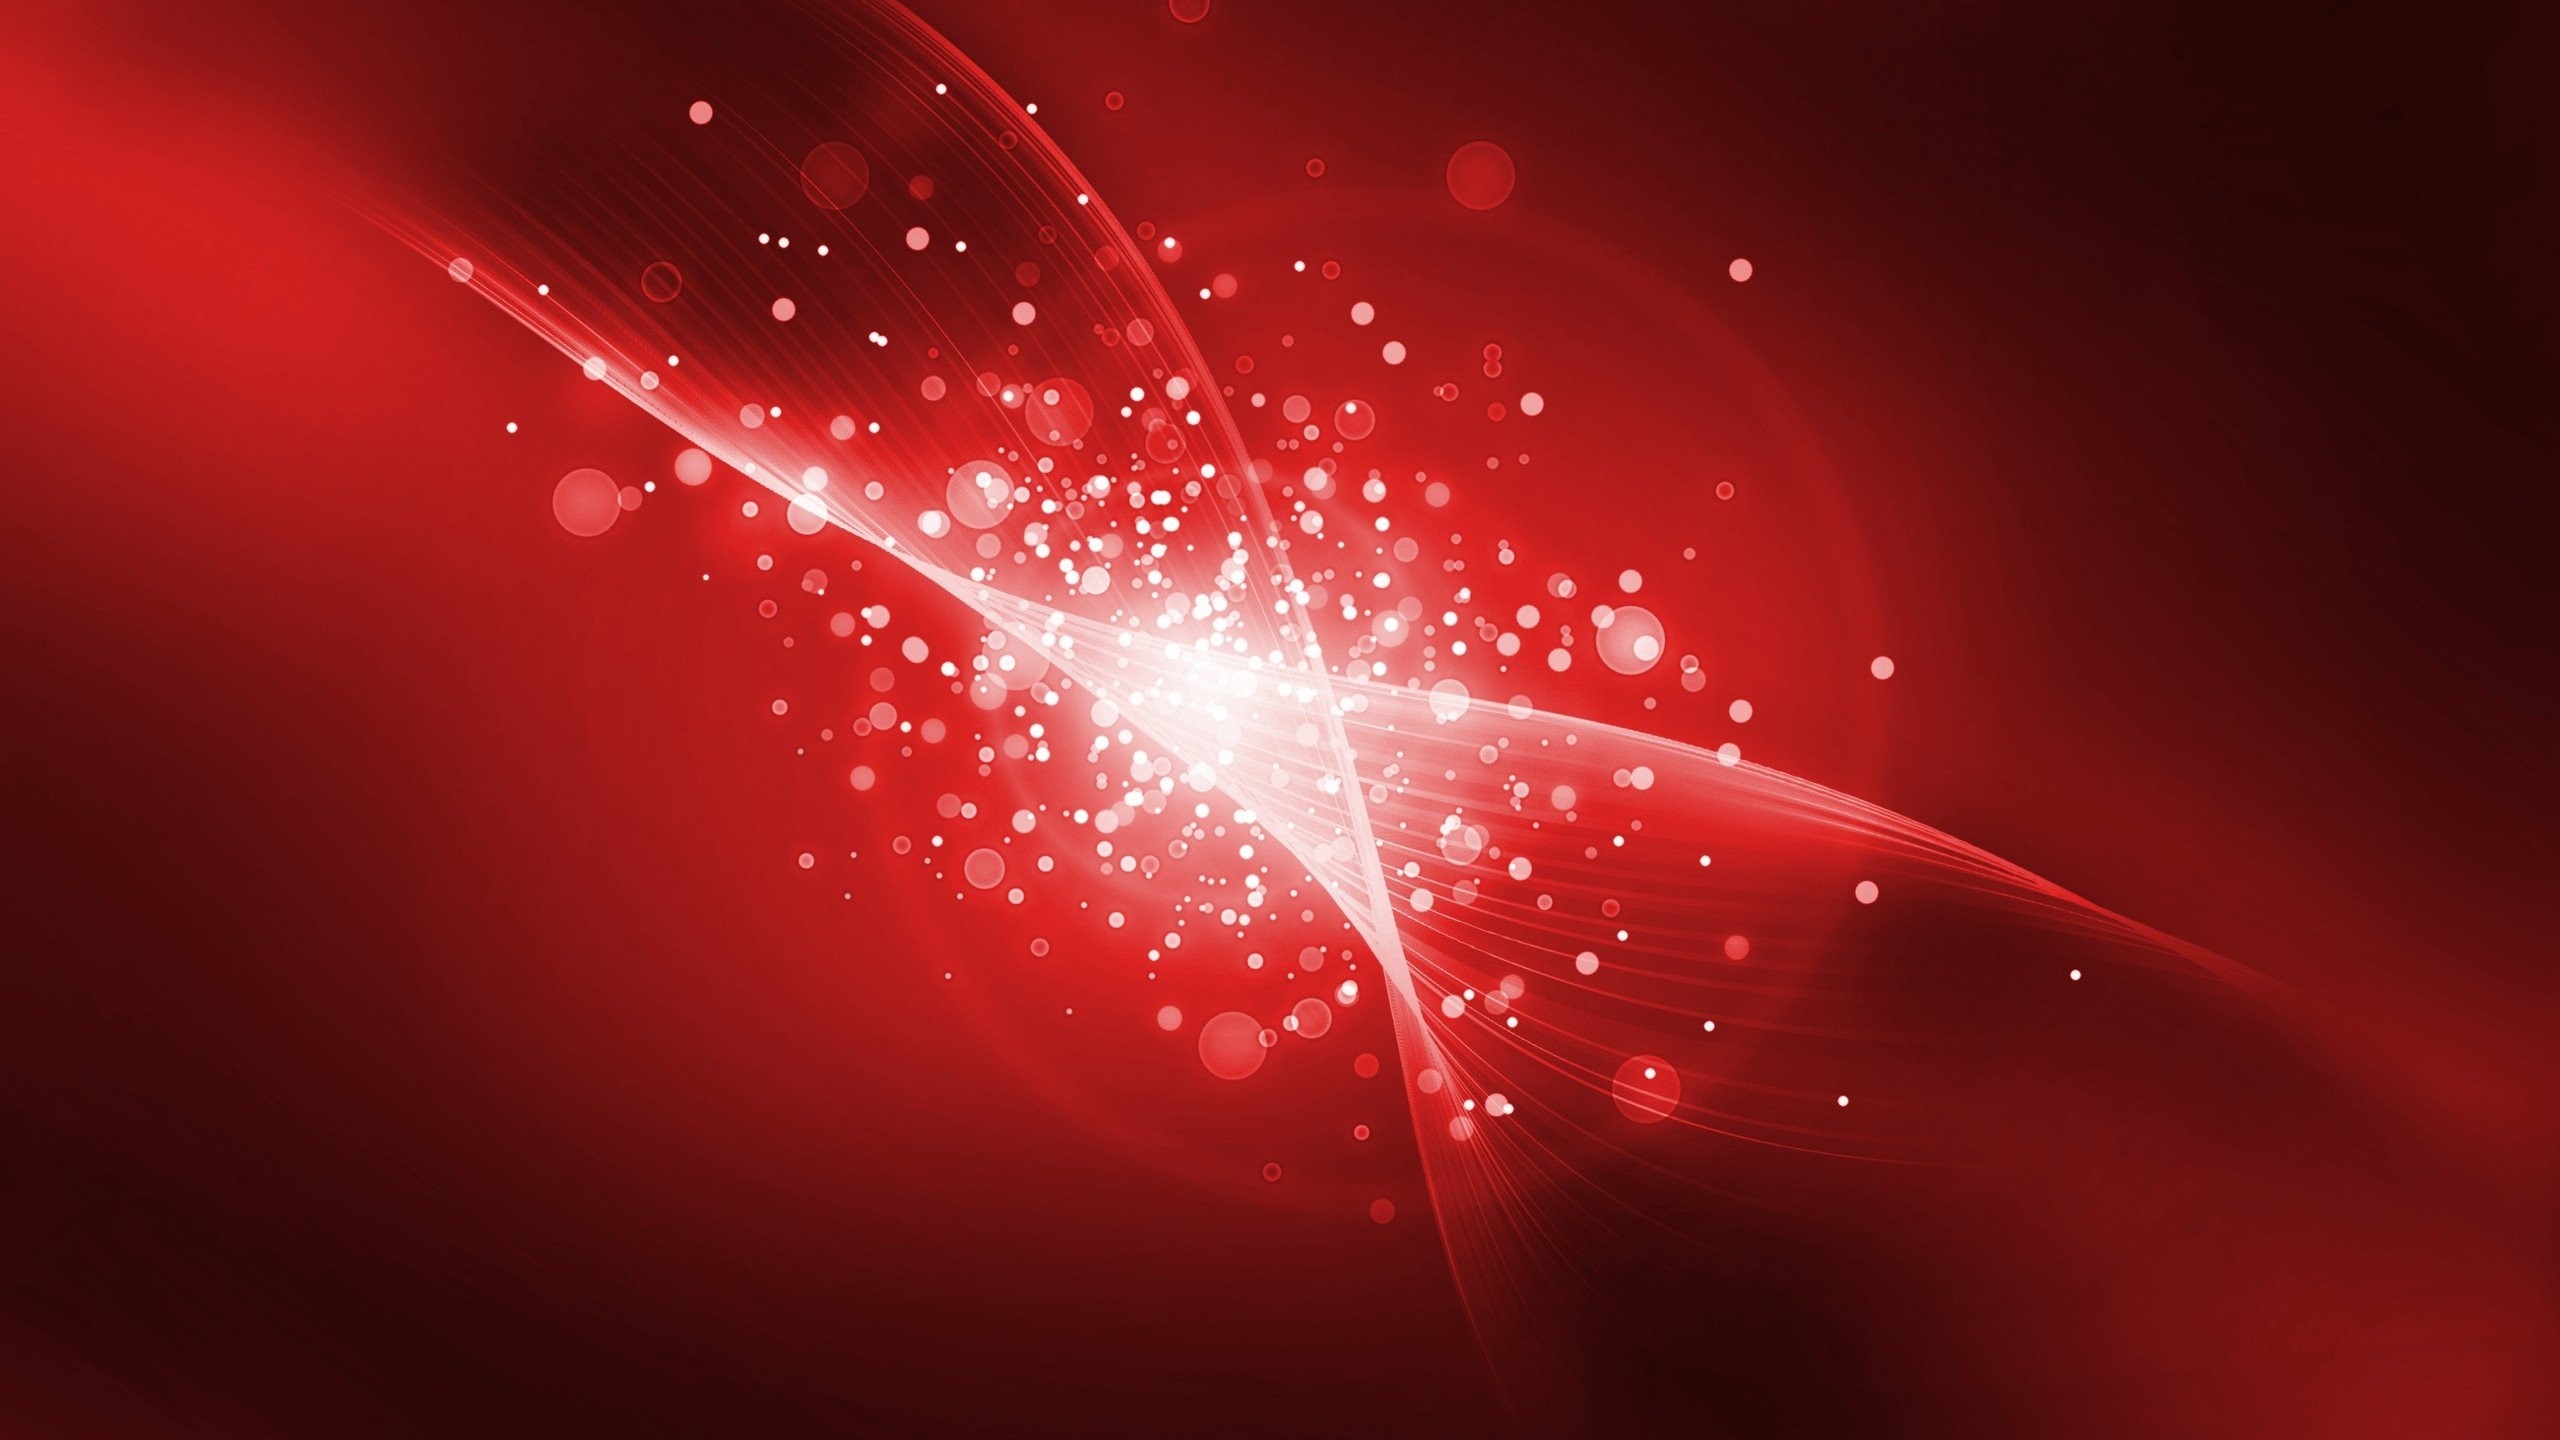 light red background wallpaper – photo #5. So You Want A Background Huh  HTML Goodies